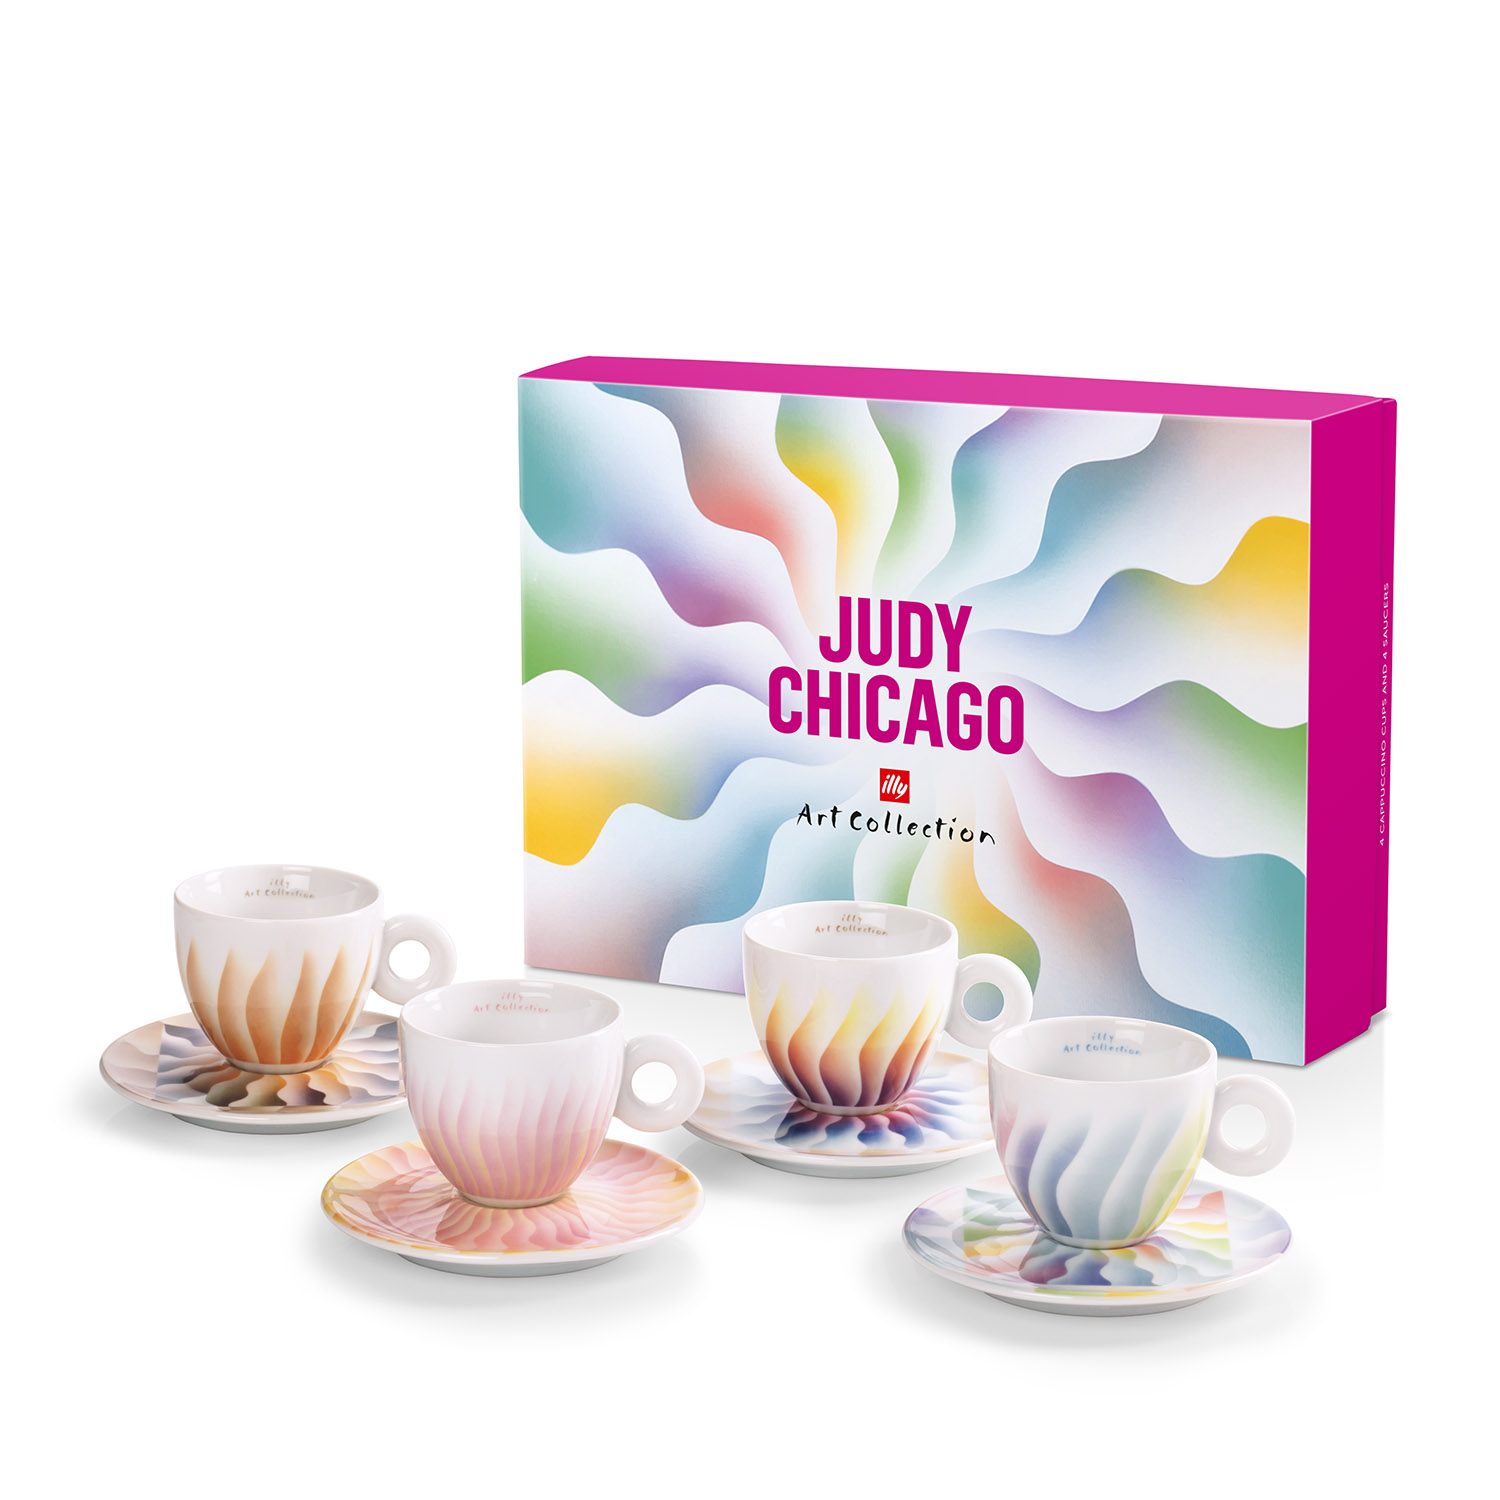 illy Art Collection JUDY CHICAGO Gift Set 4 Cappuccino Cups, Cups, 02-02-6093